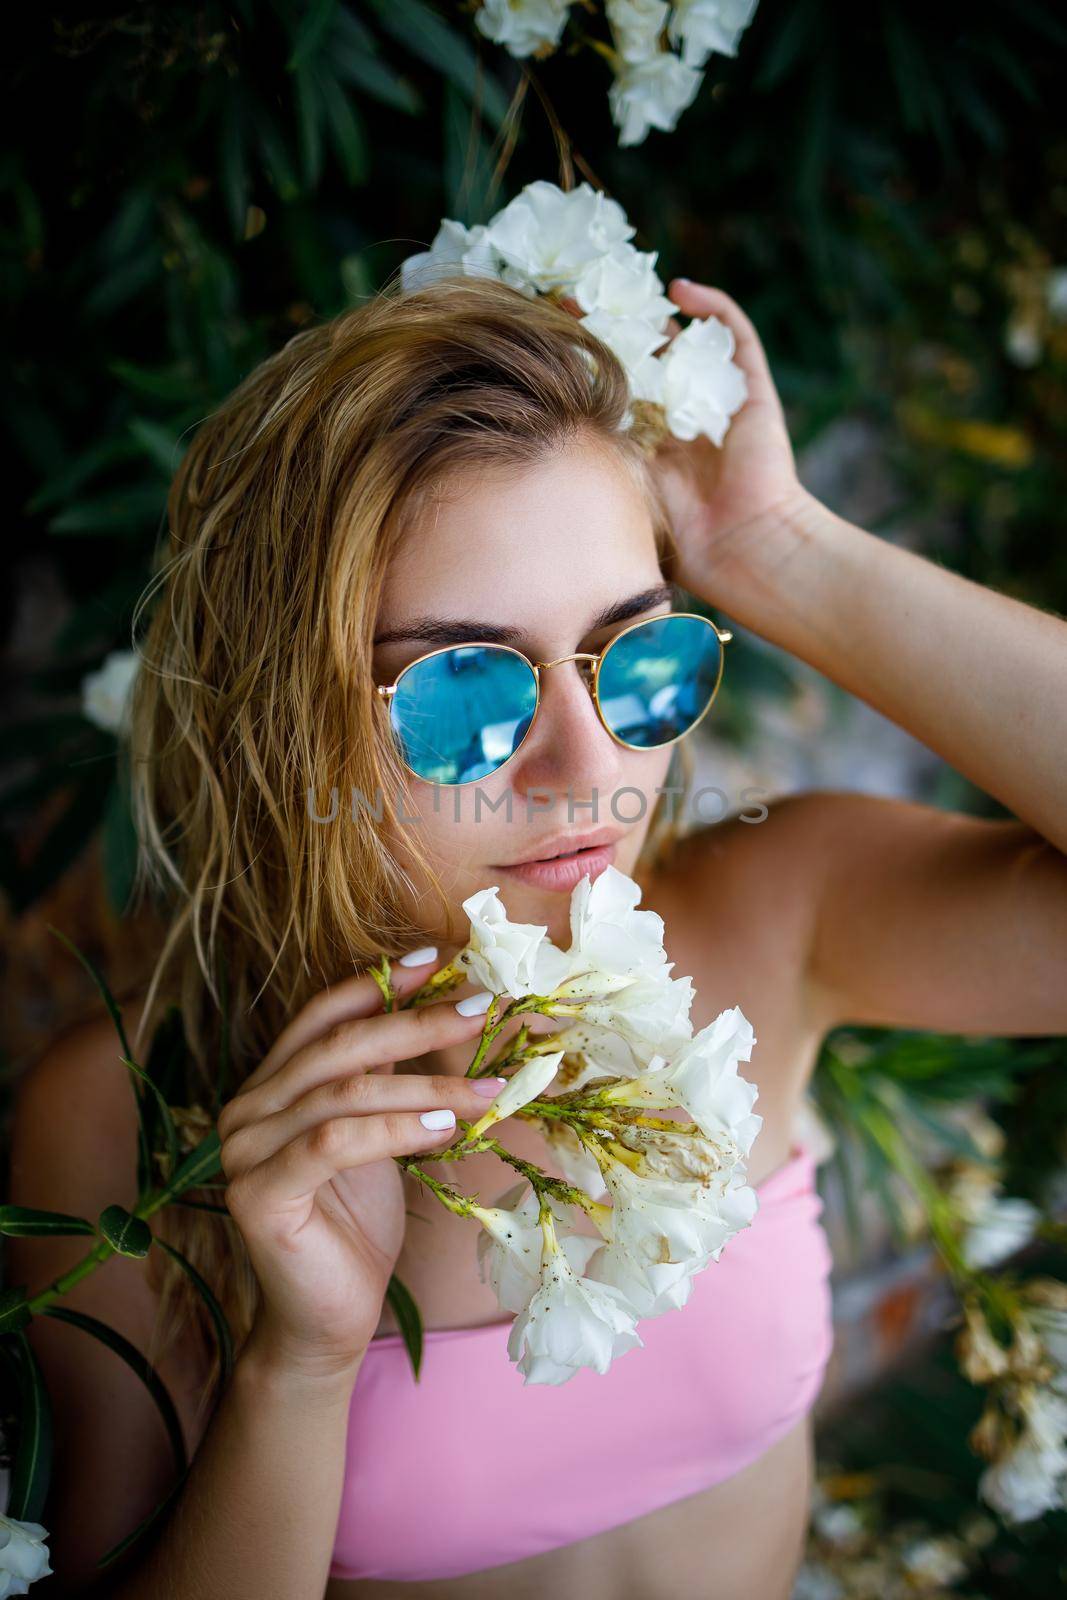 Attractive young woman in a pink swimsuit, sunglasses on her face stands by a plant with white flowers by Dmitrytph